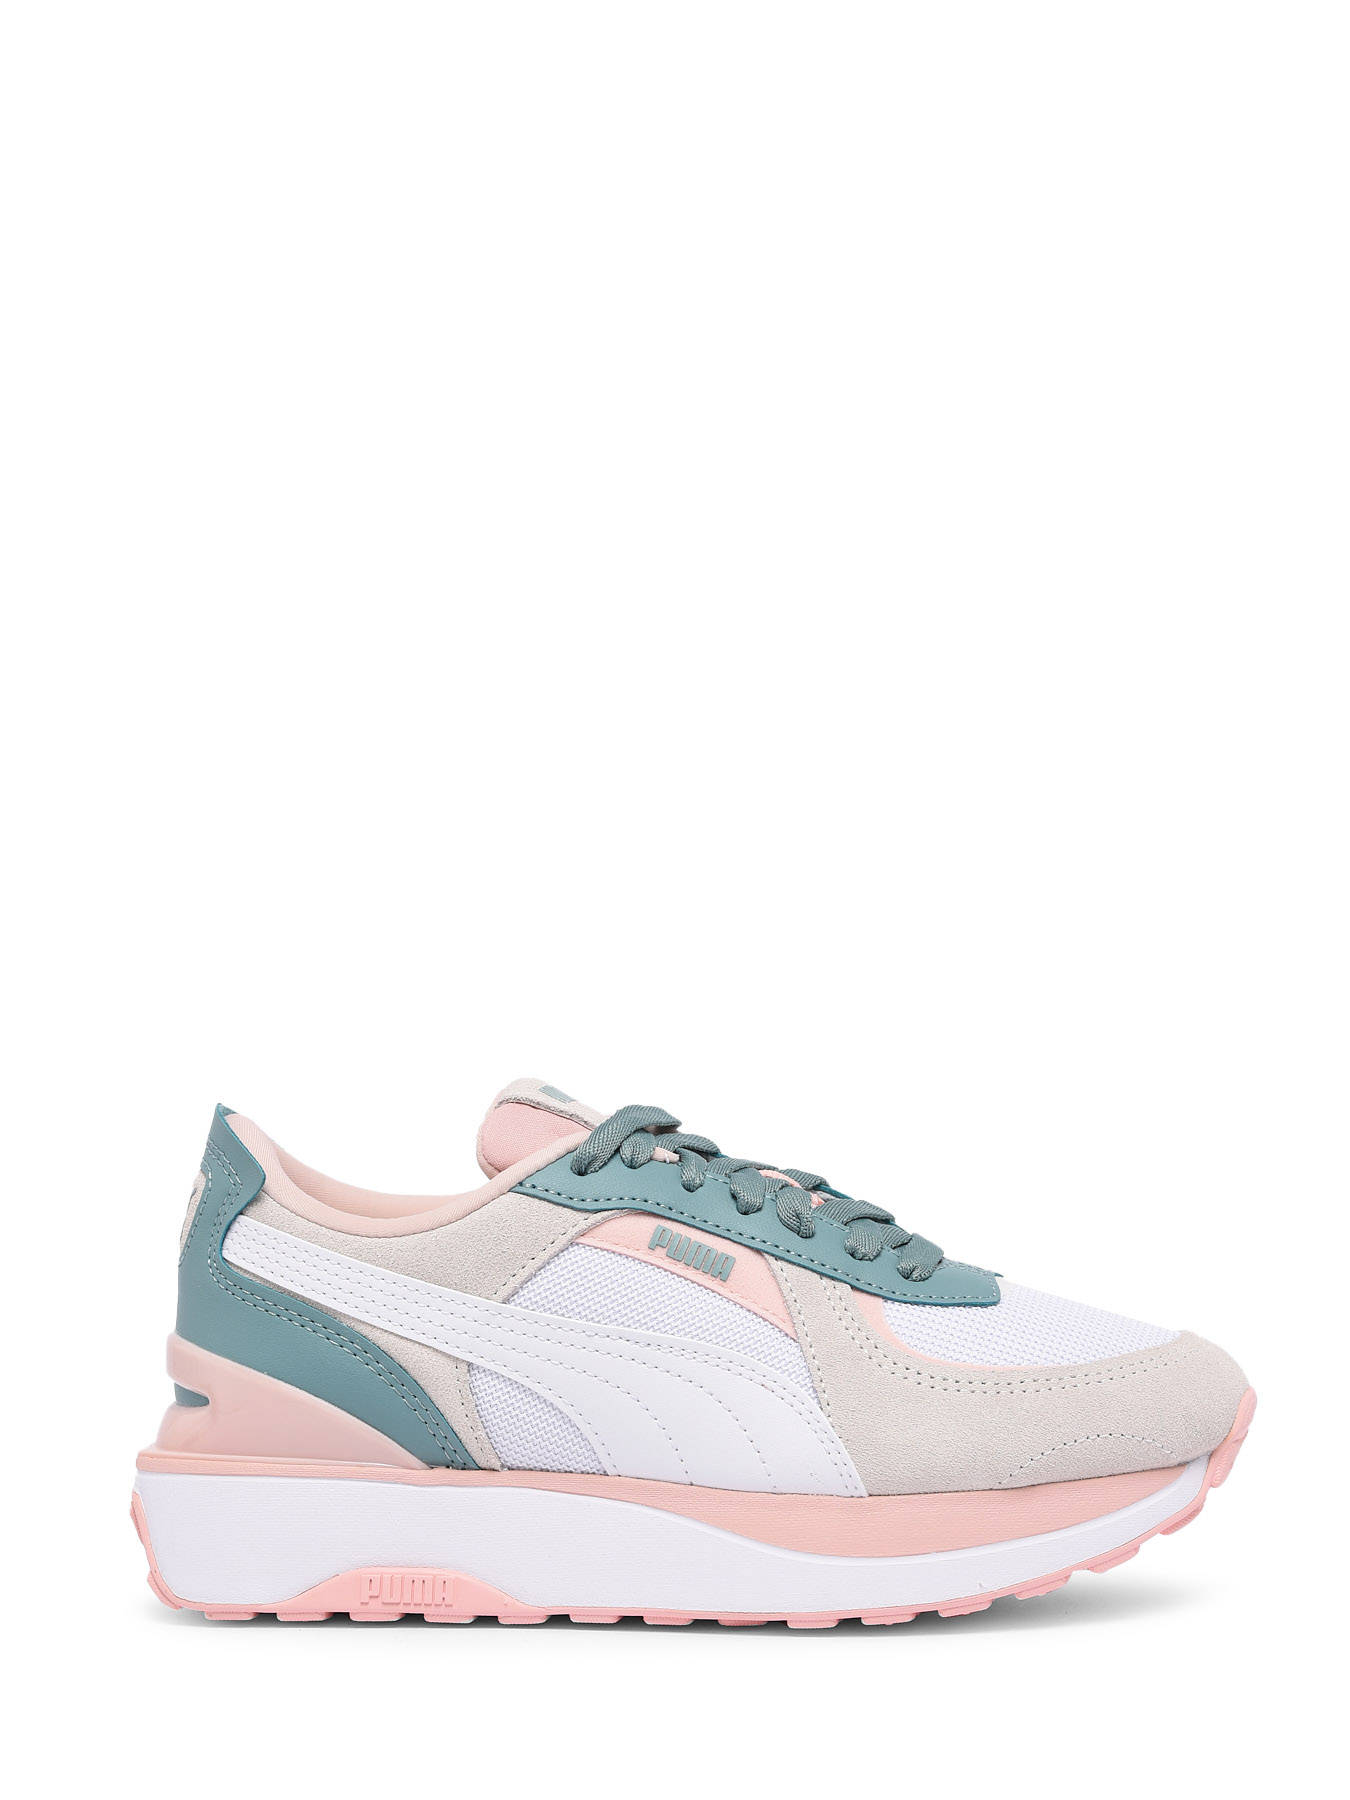 Puma Sneakers Cruise Rider NU Past - best prices